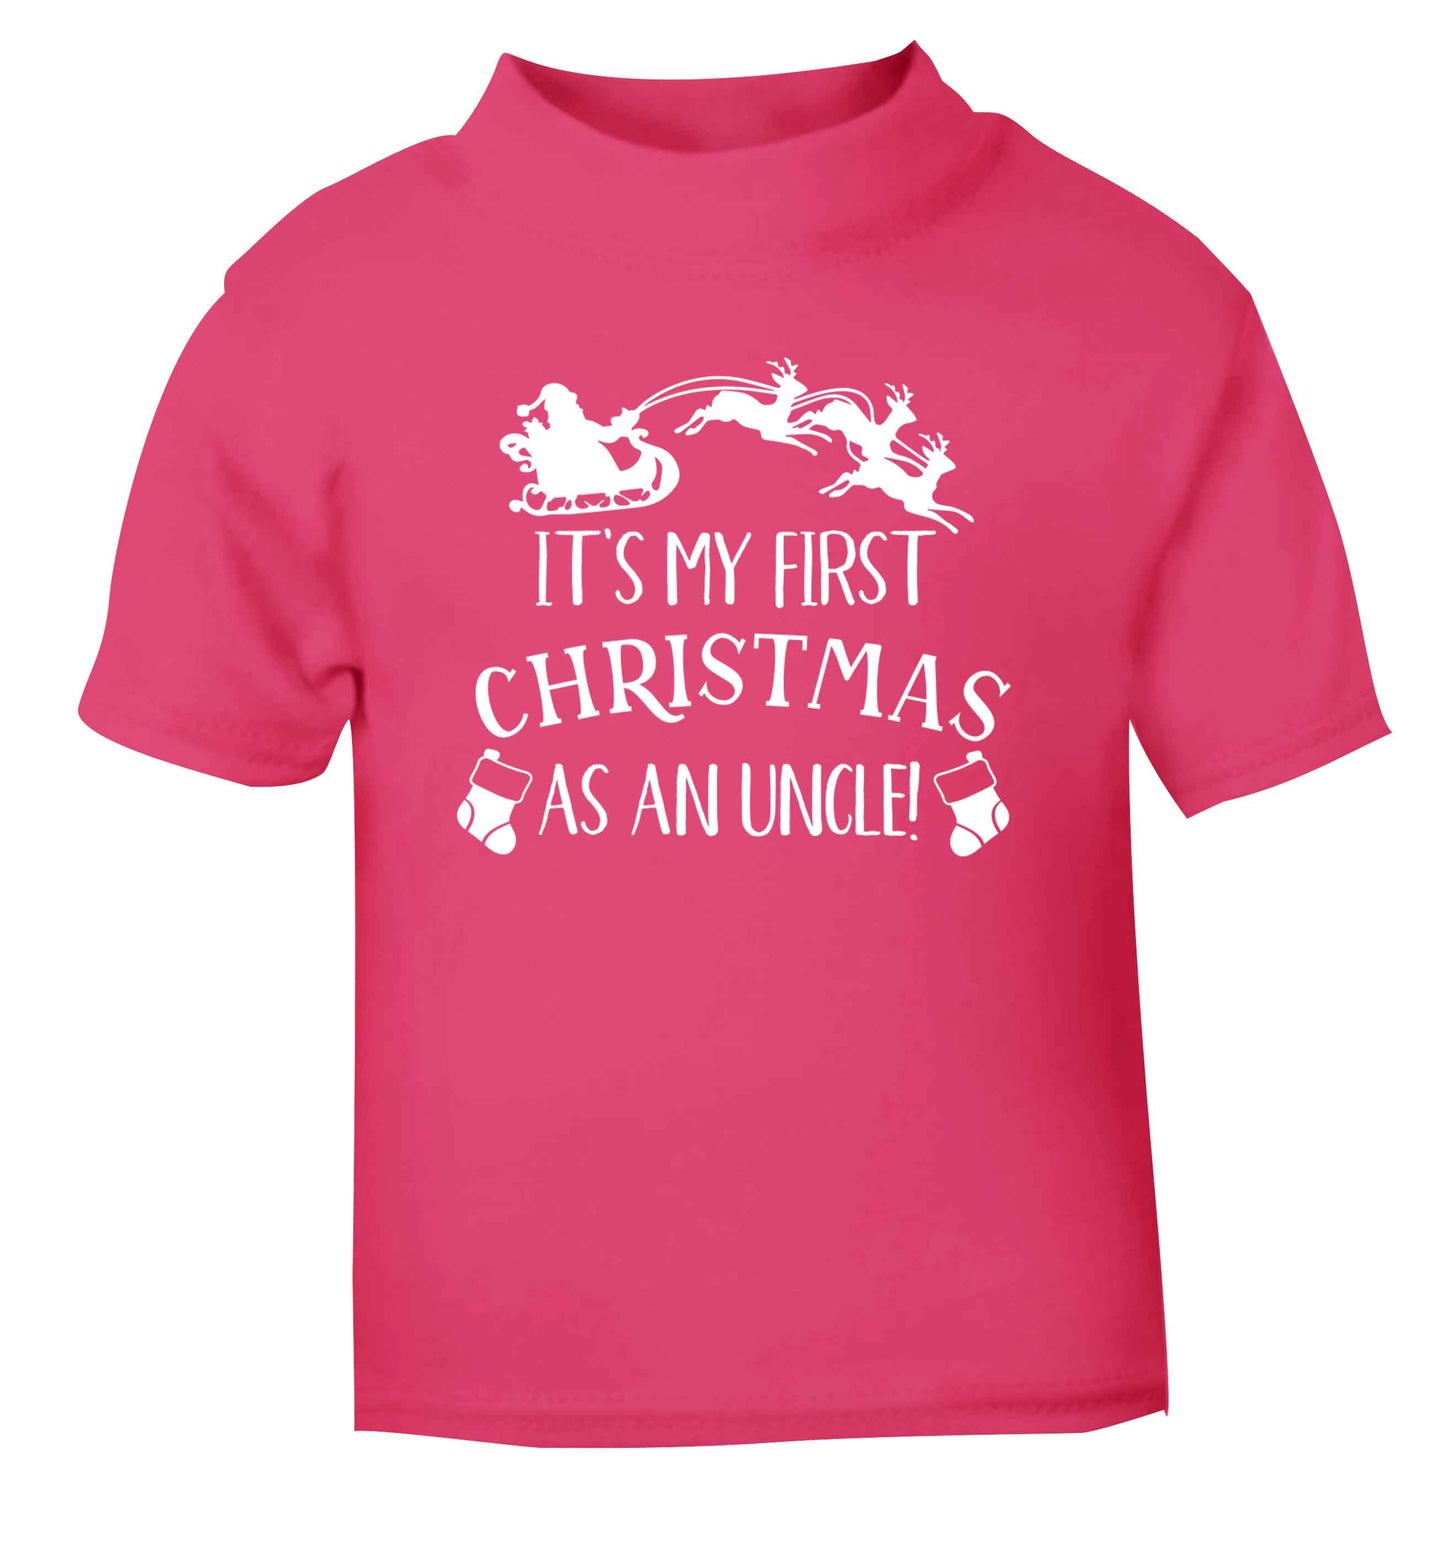 It's my first Christmas as an uncle! pink Baby Toddler Tshirt 2 Years